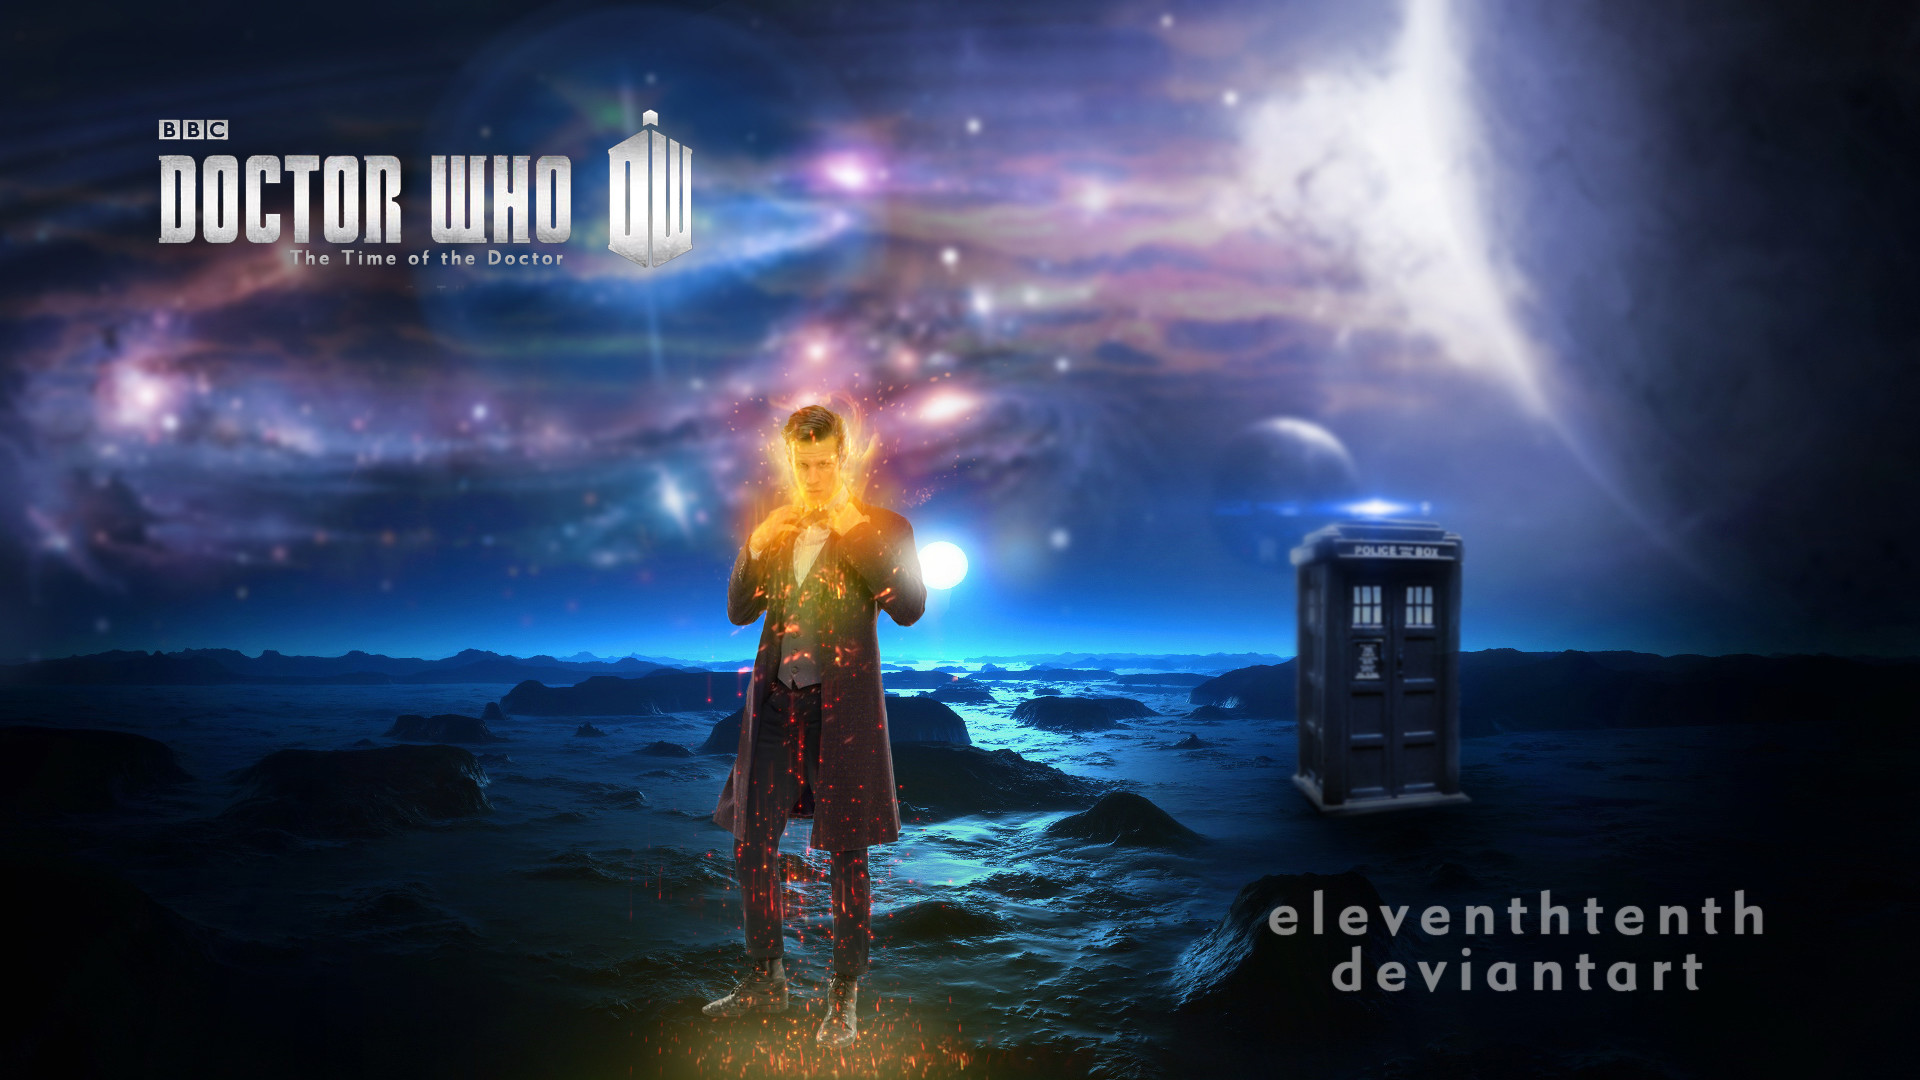 1920x1080 The Doctor And Amy Pond Doctor Who Wallpaper 1920Ã1080 Doctor Who  Wallpapers Matt Smith